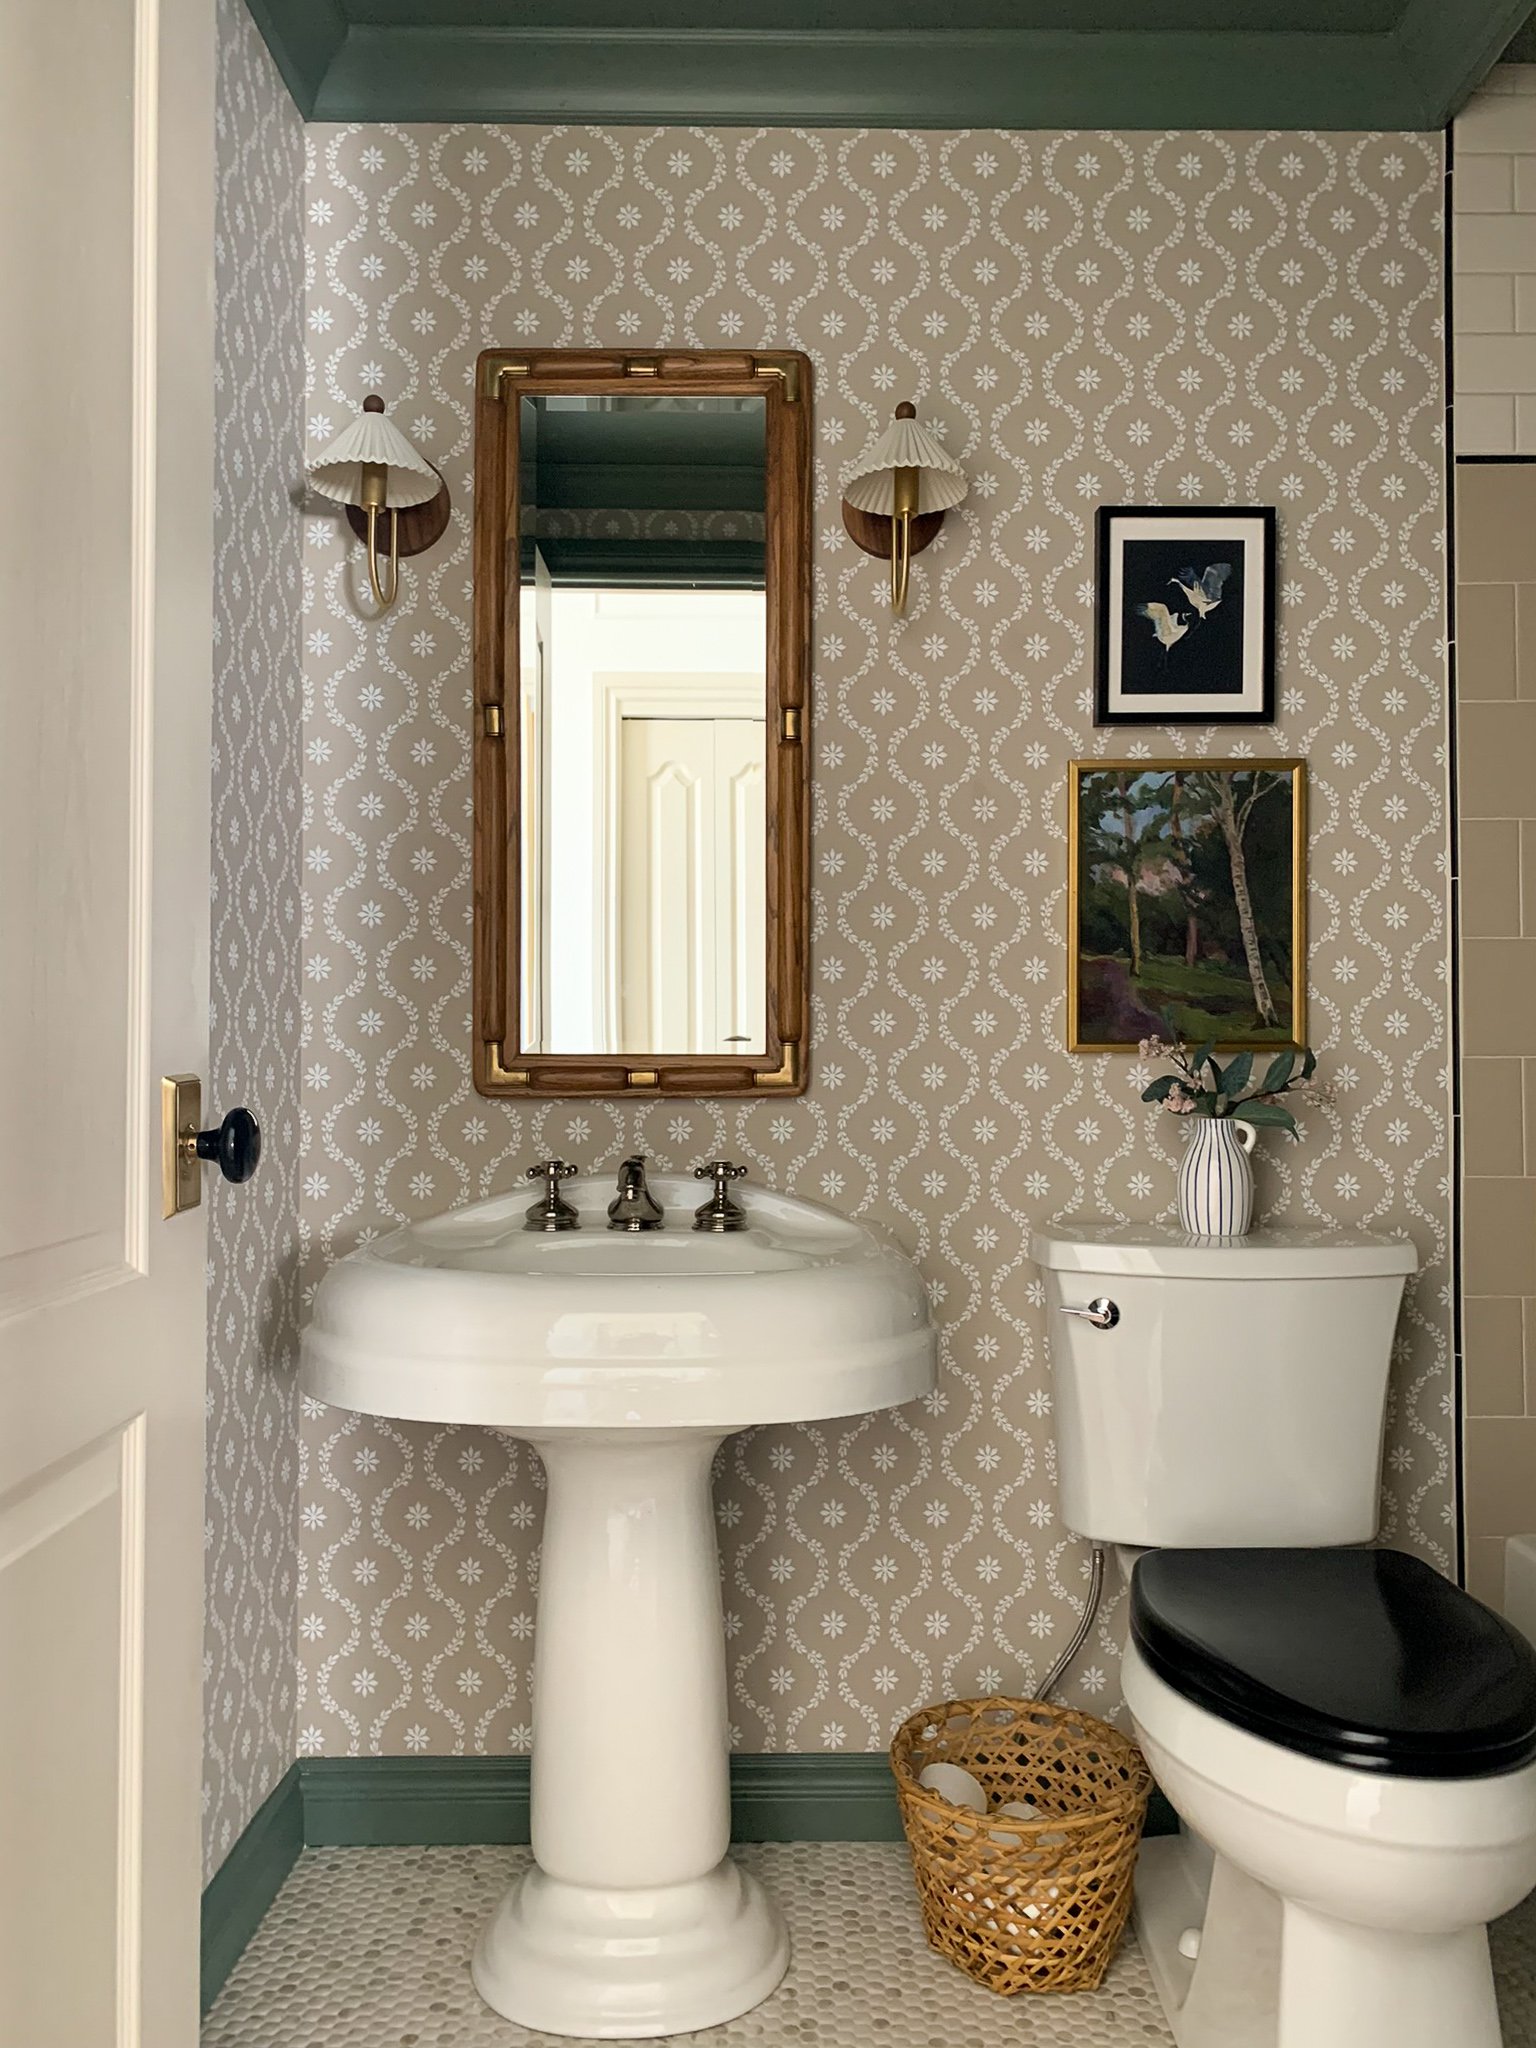 Bathroom with green ceiling and crown moulding, floral beige and white wallpaper, brass and walnut scalloped shade sconces, vintage wood mirror, art stacked over toilet, penny tile and vintage pedestal sink